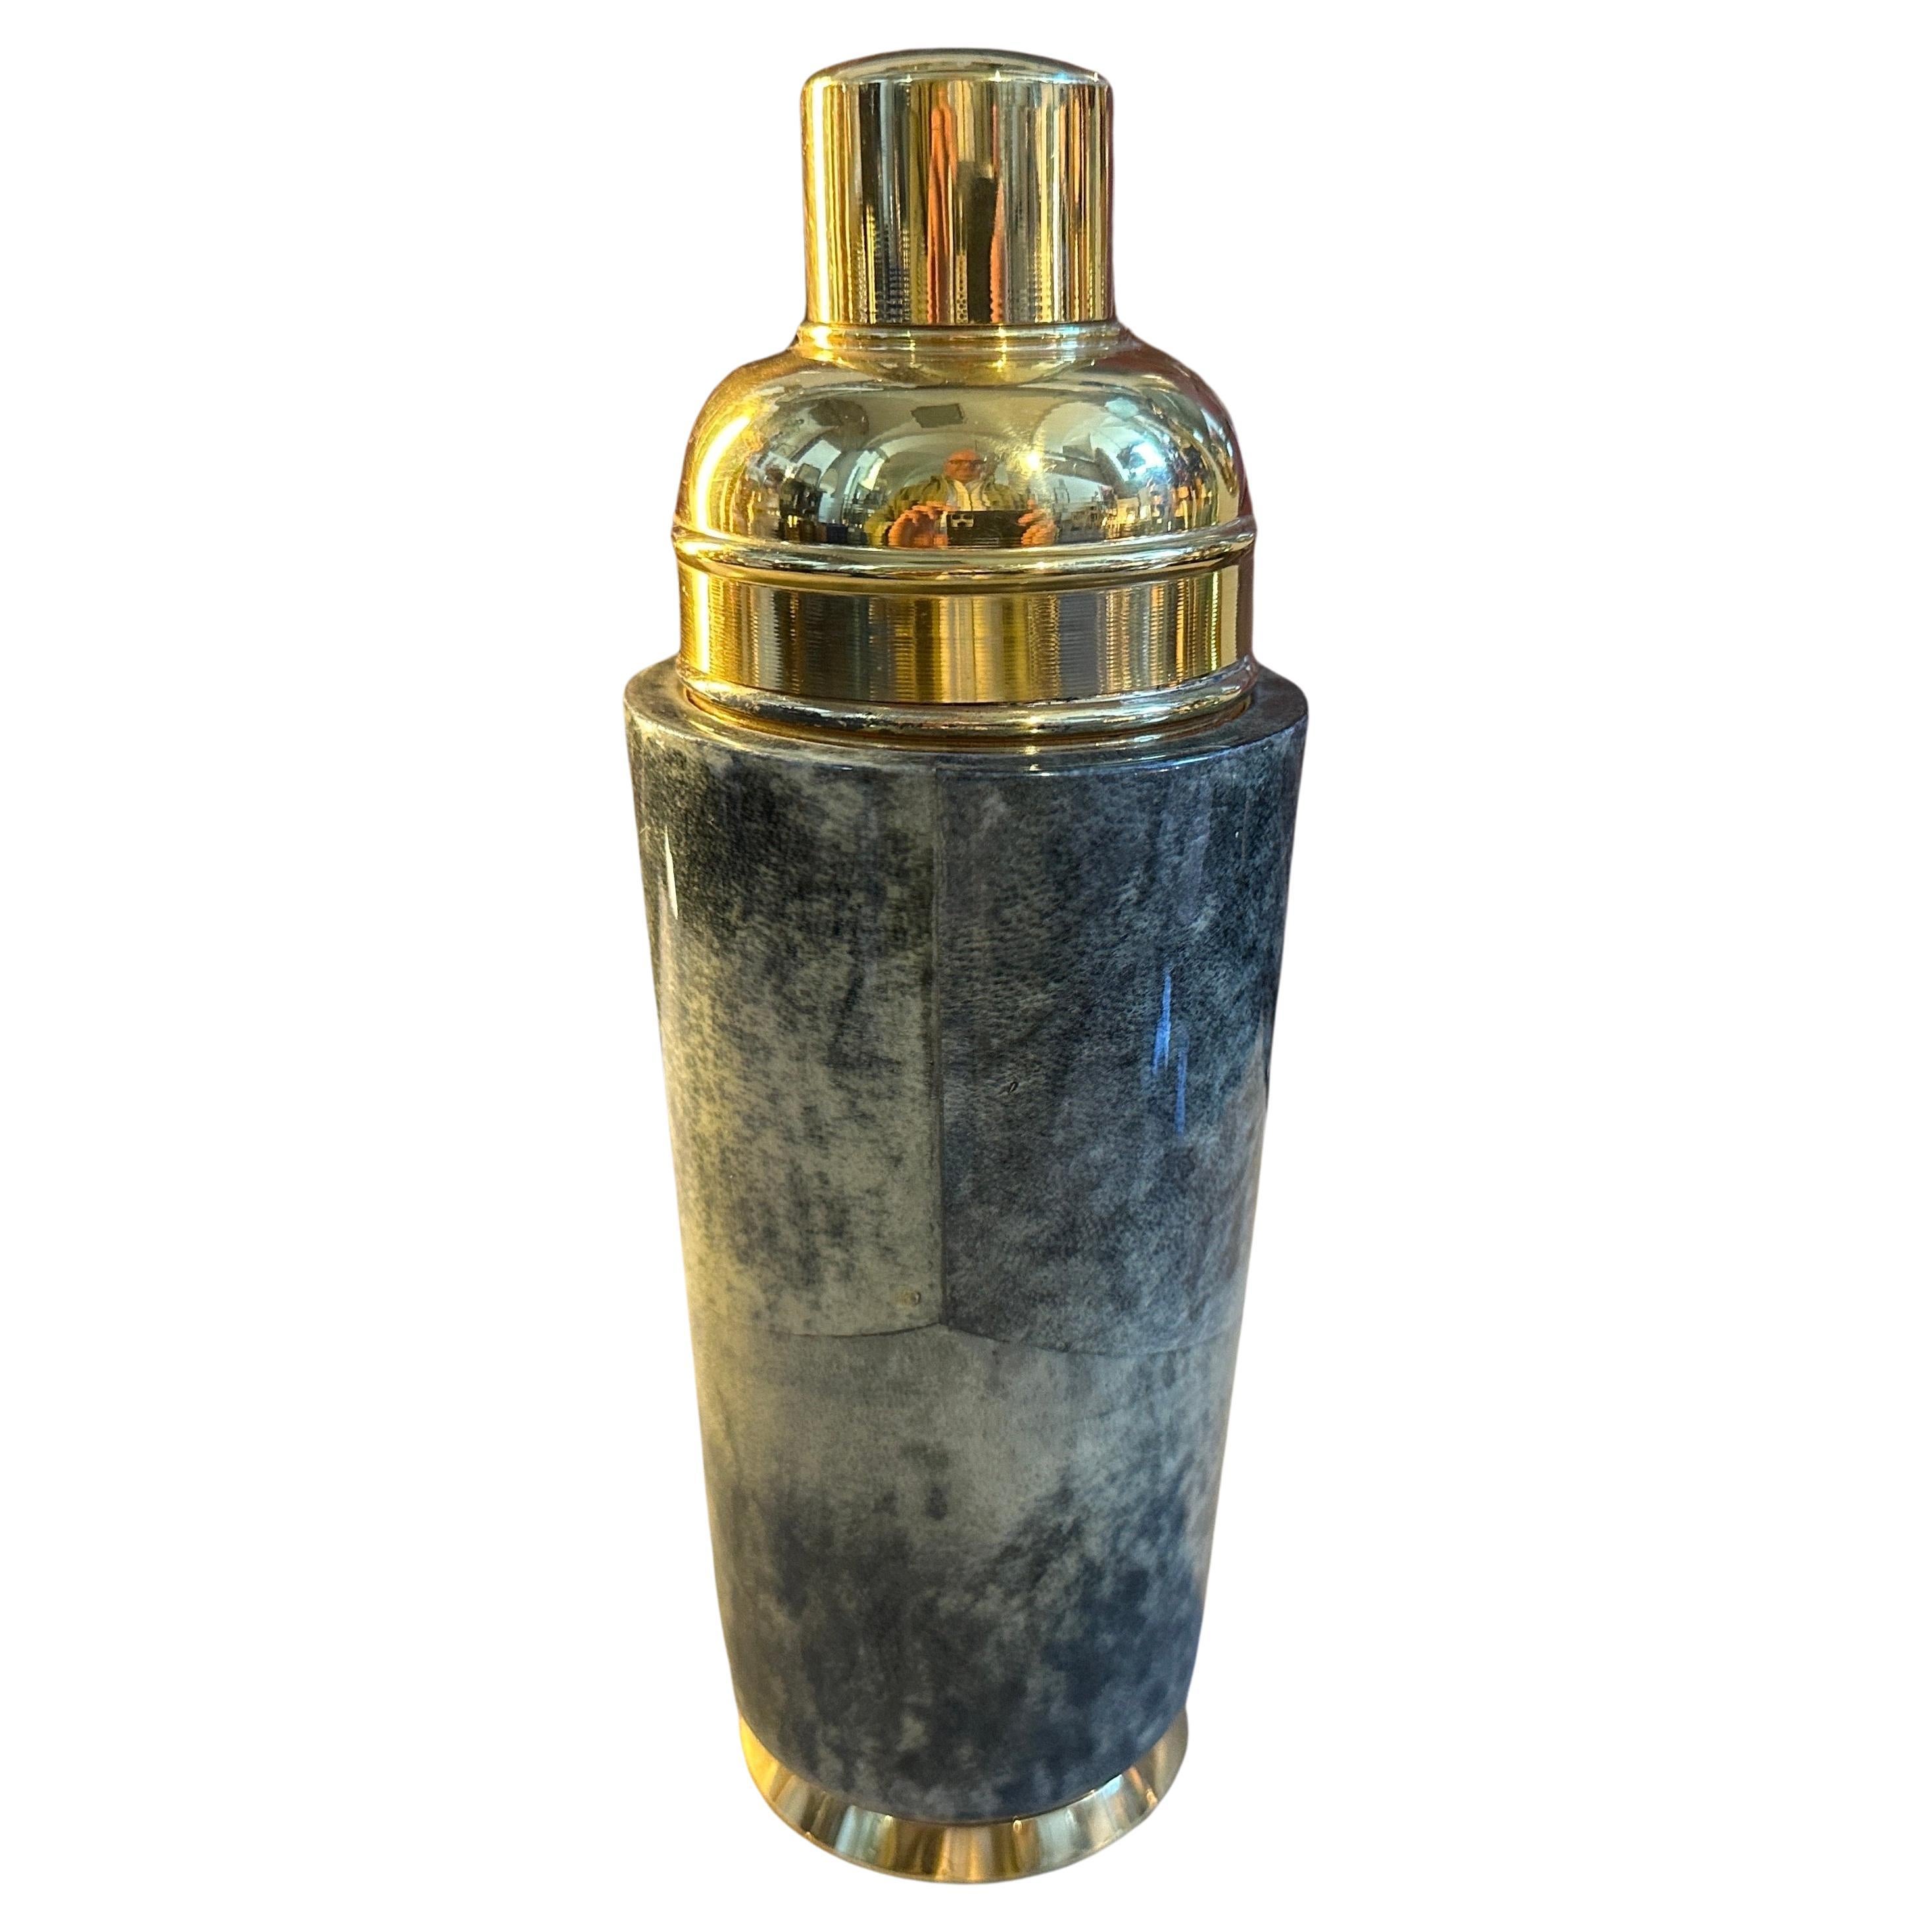 1950s Mid-Century Modern Brass and Green Goatskin Cocktail Shaker by Aldo Tura For Sale